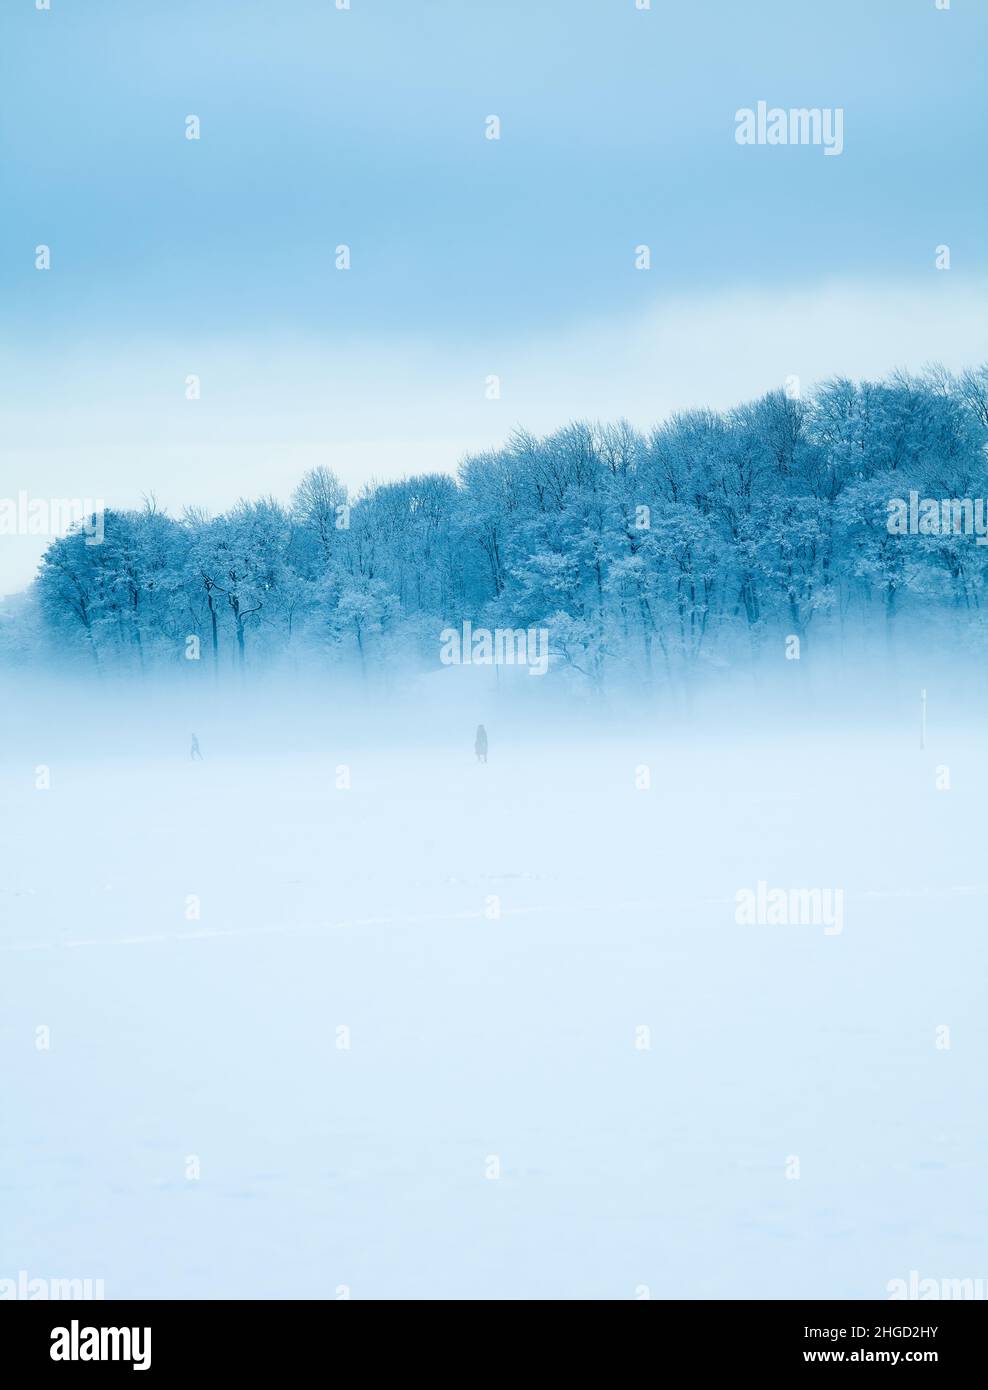 Foggy winter landscape. People walking on the frozen sea. Snow covered trees. Stock Photo